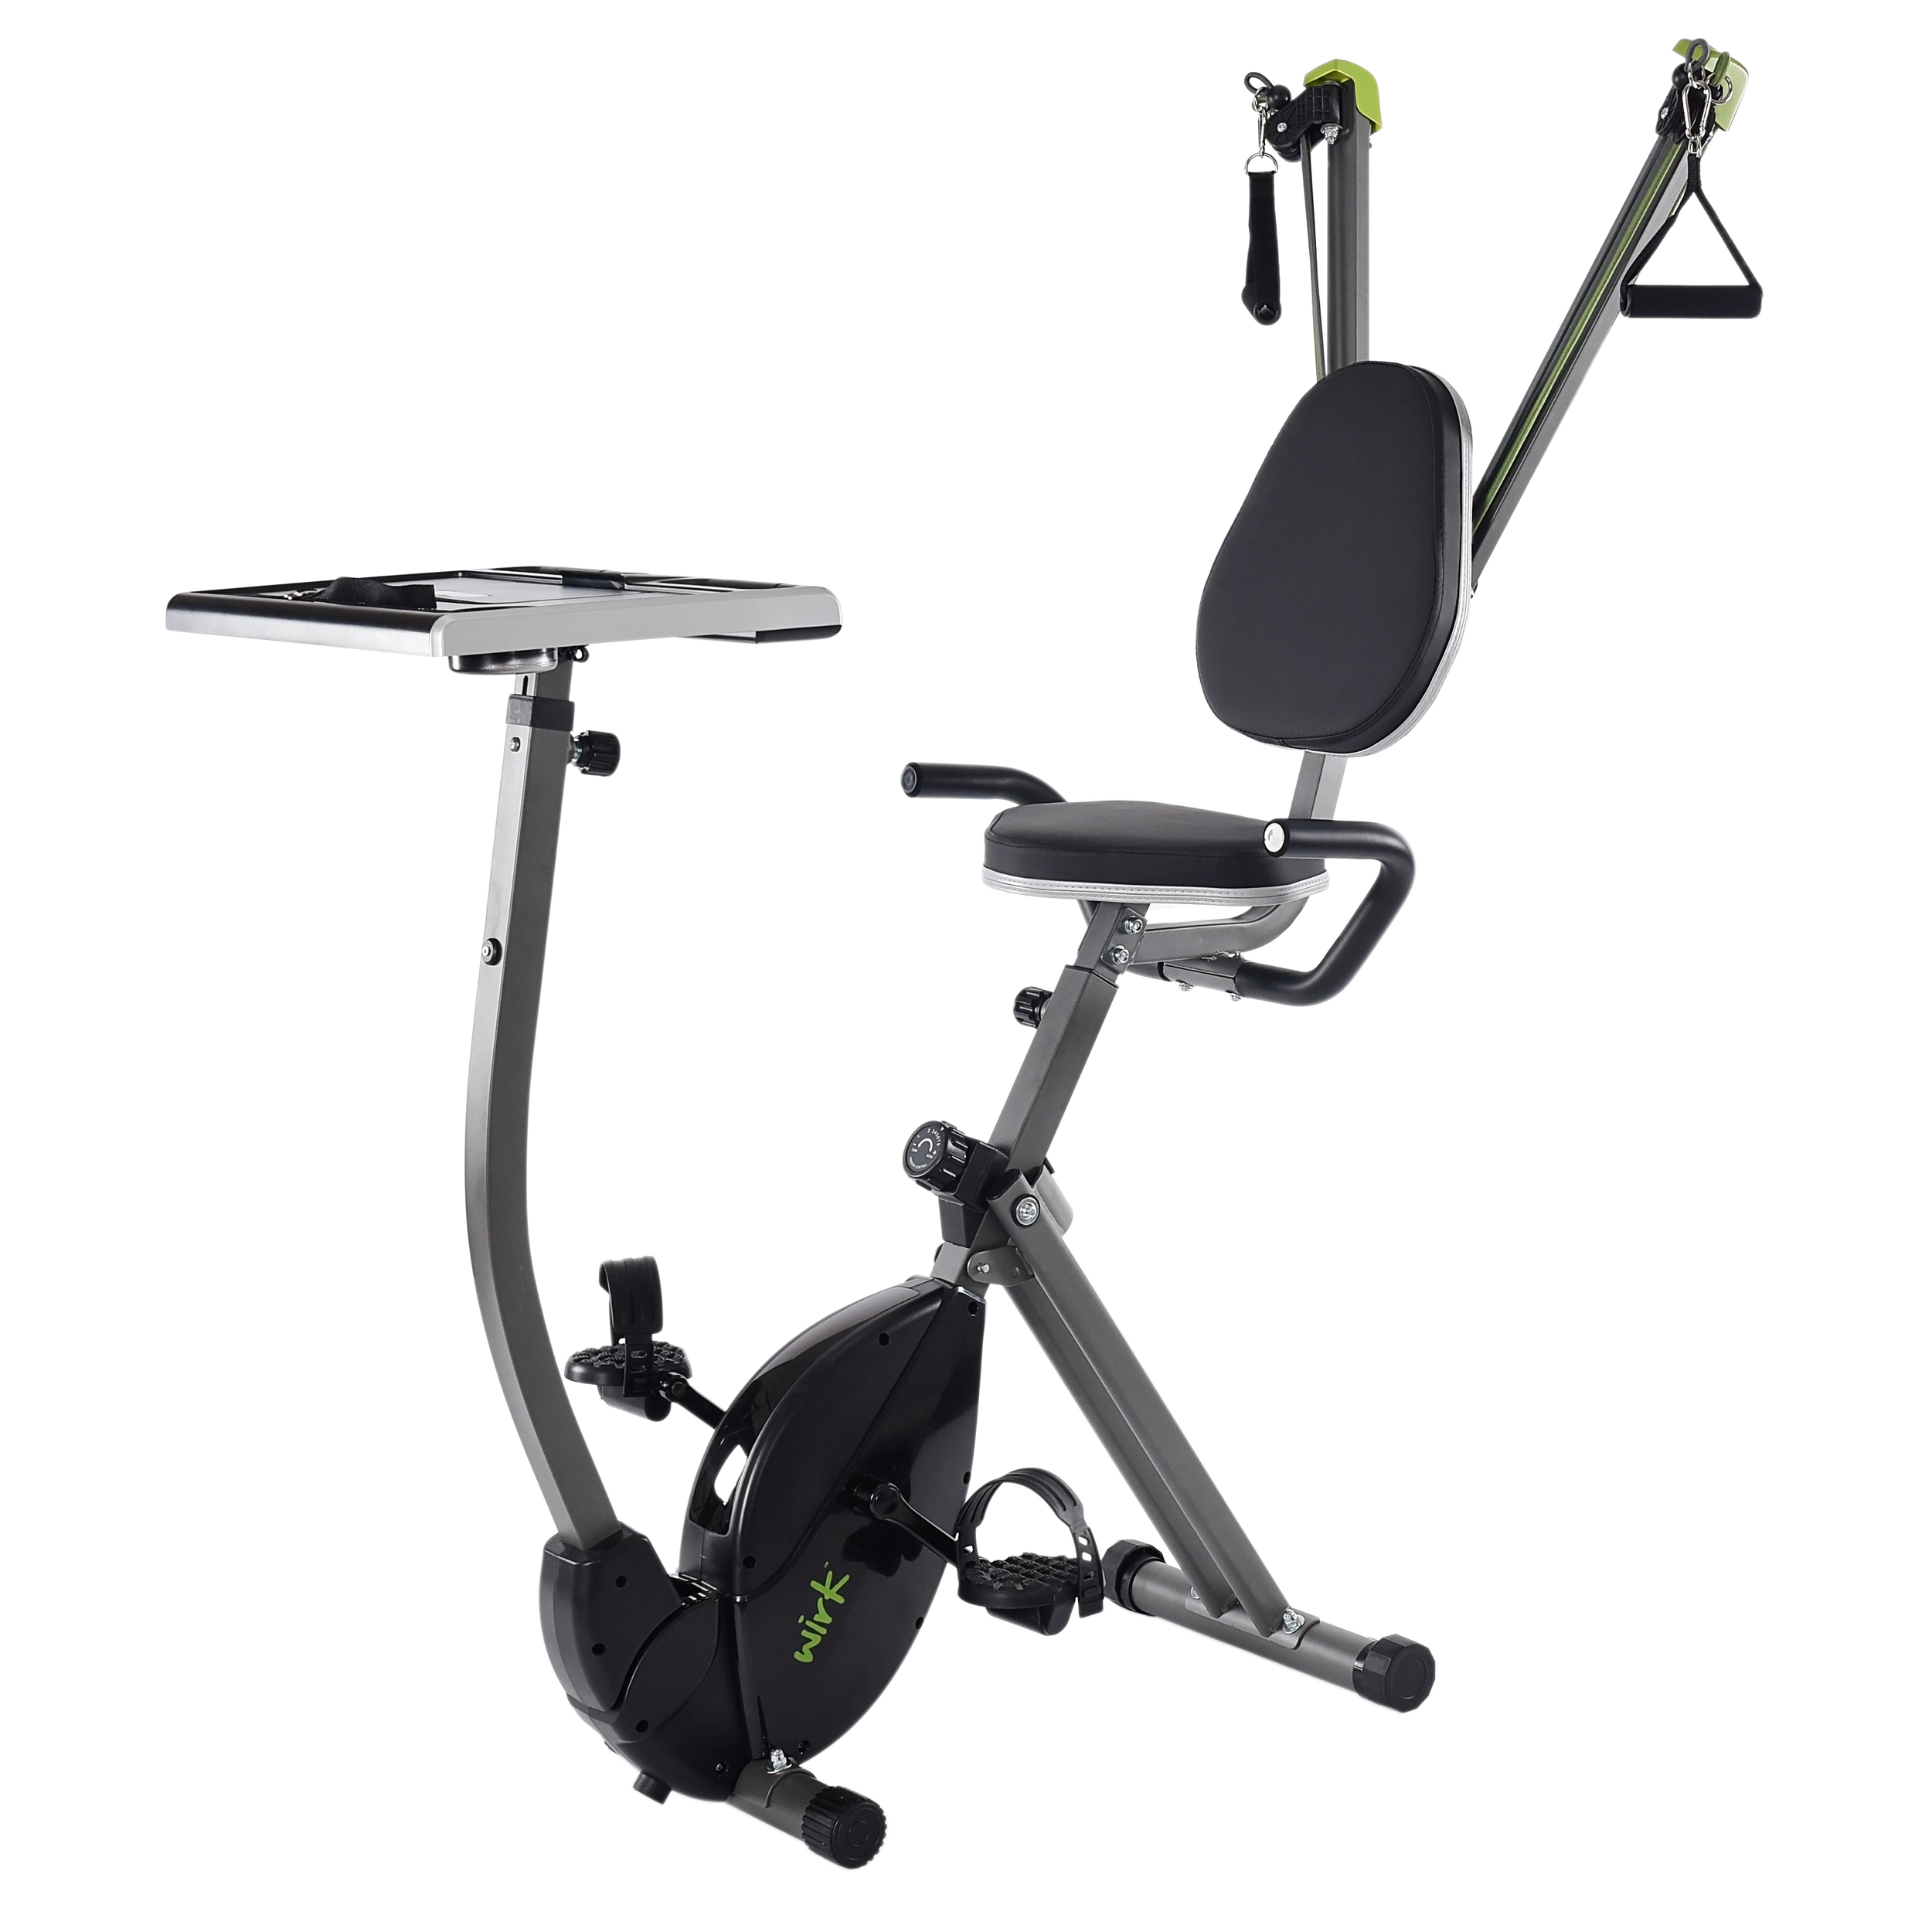 Foldable Wirk Ride Exercise Bike, Workstation and Strength System Product Photo.